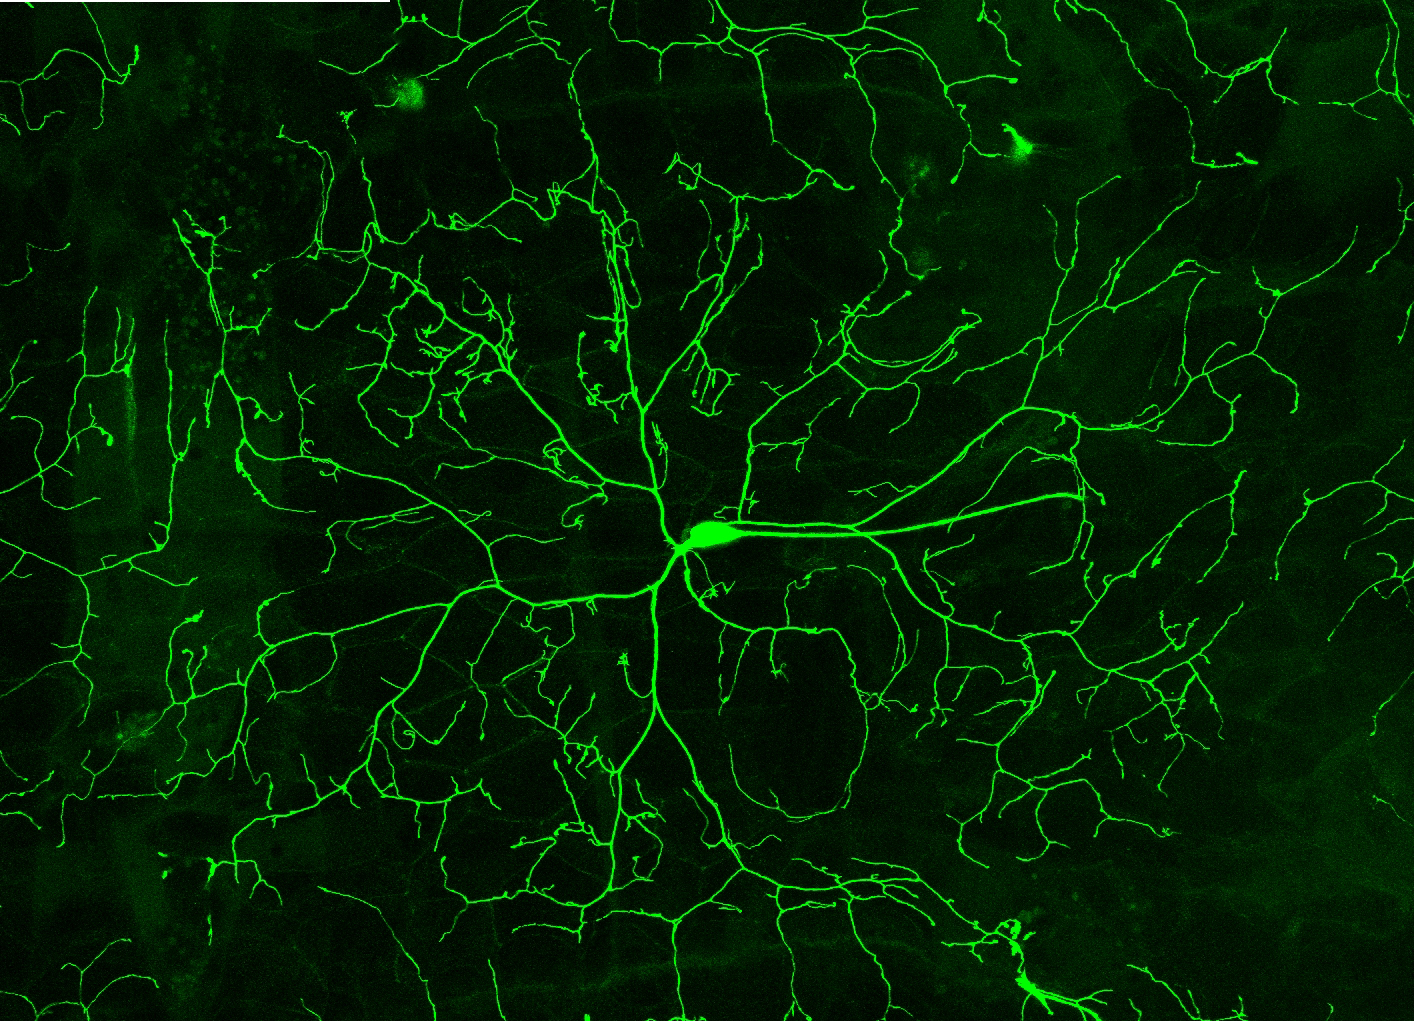 Showcase Image for The PP2A serine/threonine phosphatase complex functions in regulating dendritic morphology